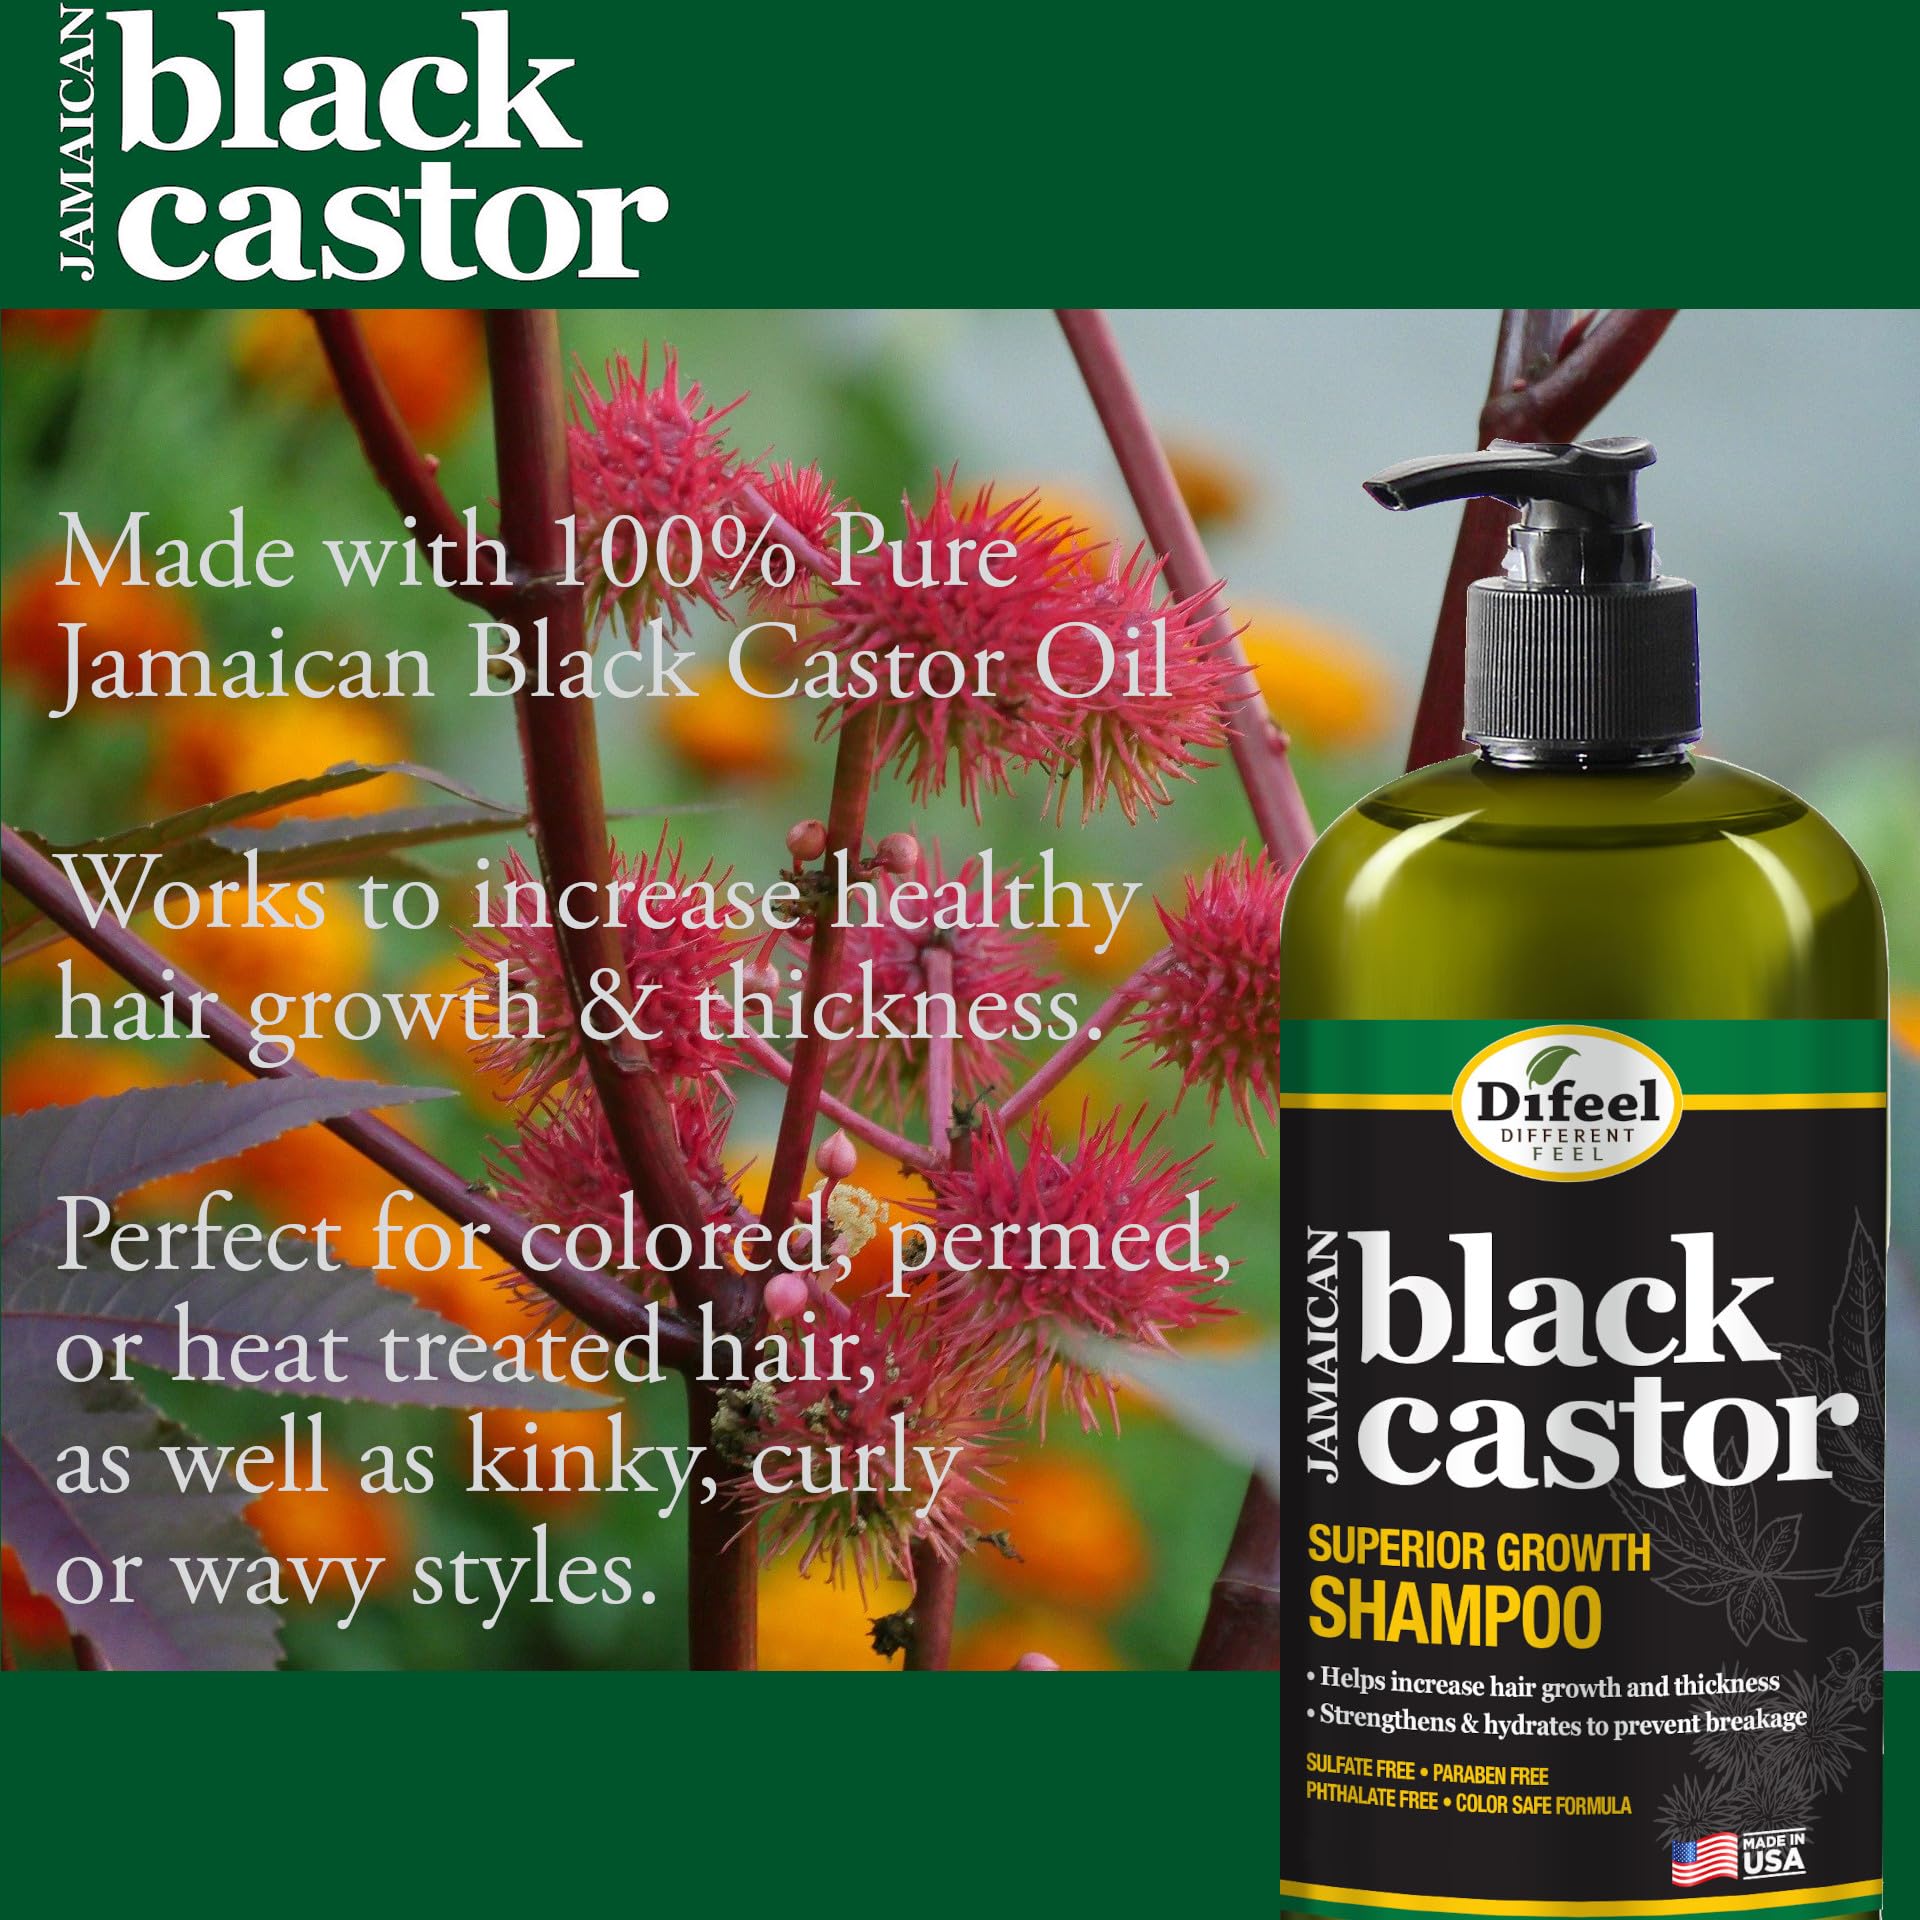 Difeel Superior Growth Jamaican Black Castor Shampoo 33.8 oz. - Sulfate Free Shampoo made with Natural Ingredients